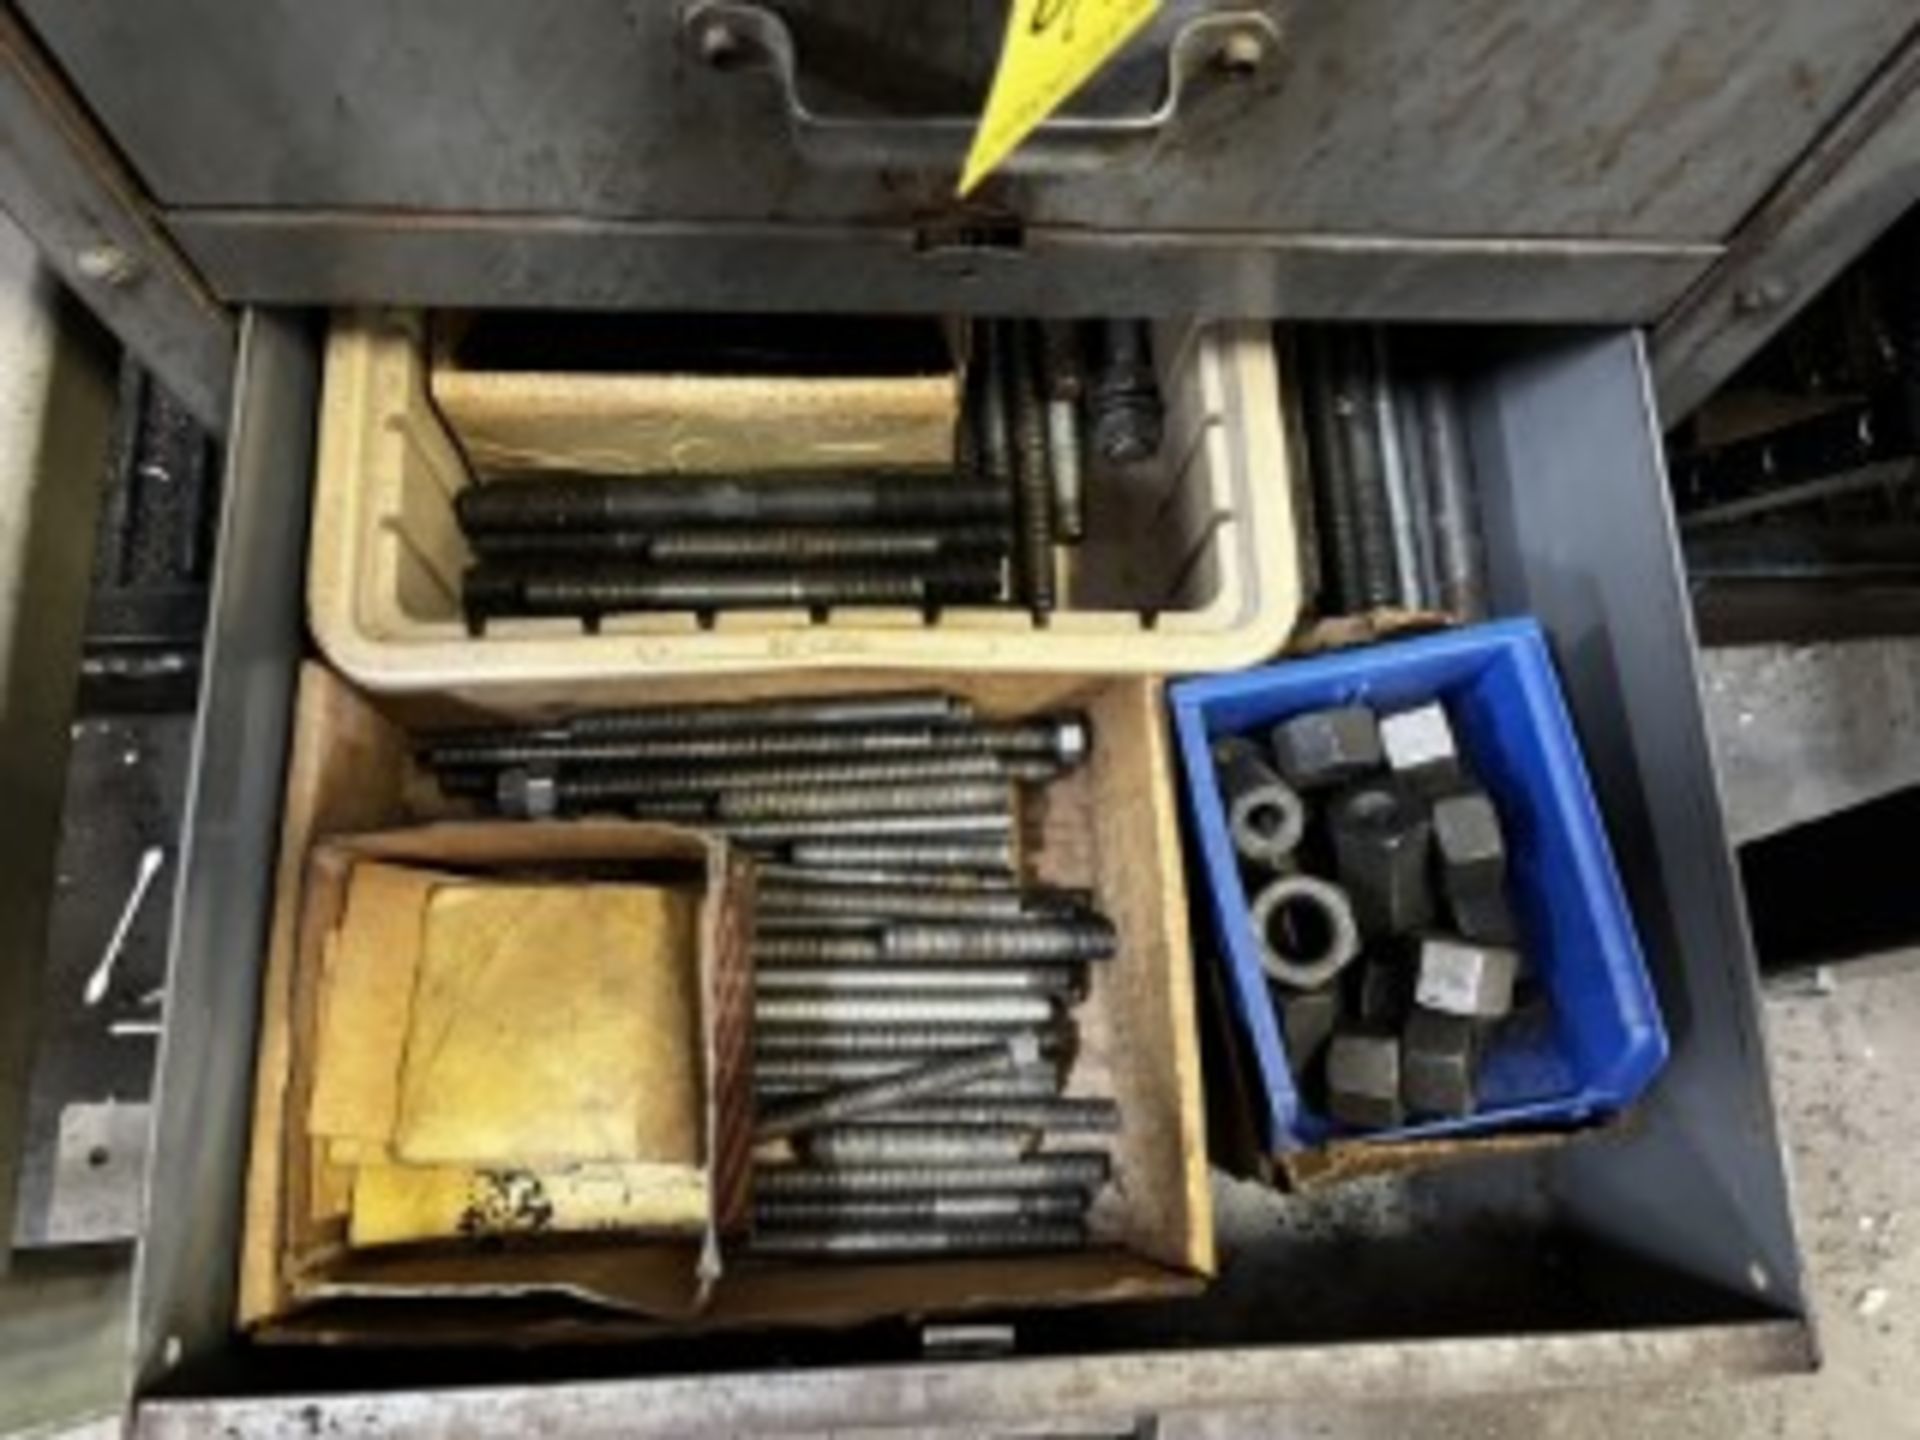 CABINET WITH CONTENTS - SCREWS, NUTS, WASHERS, ETC - Image 4 of 4